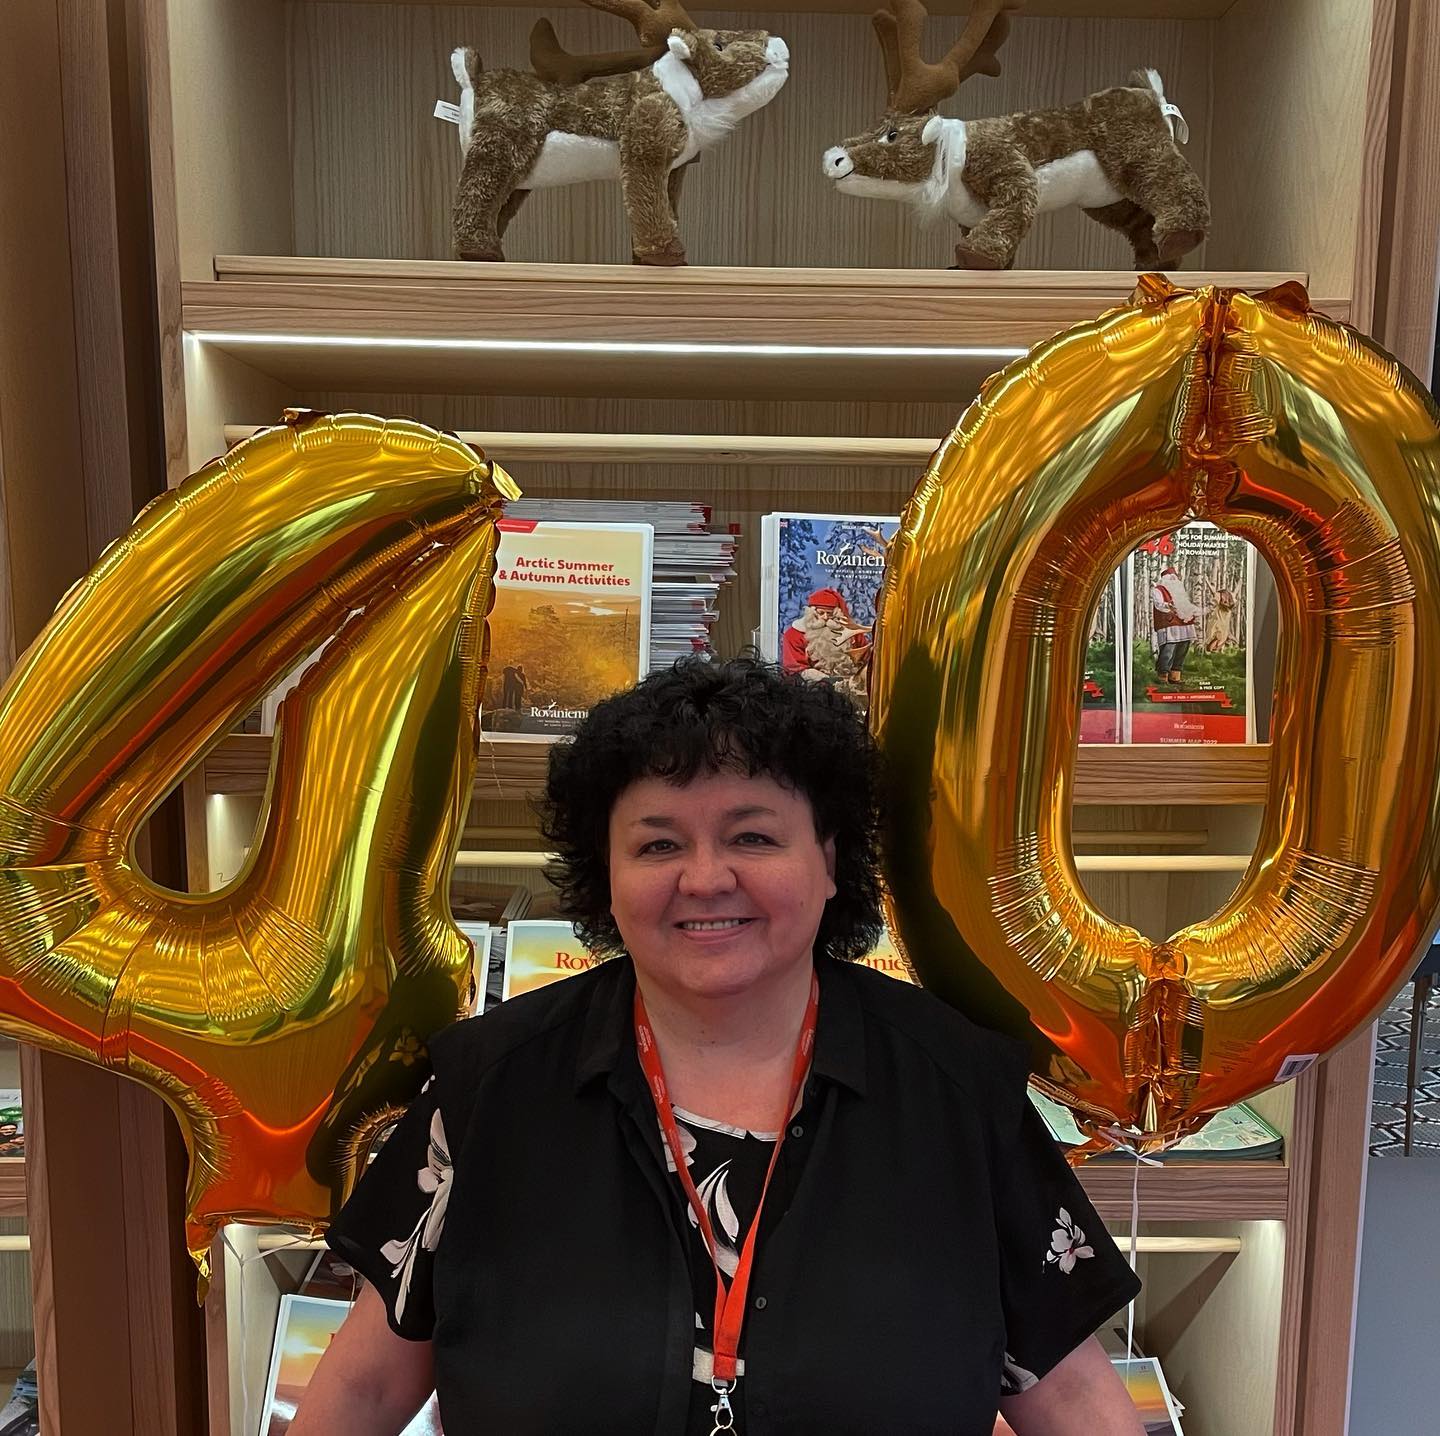 Leena has been serving customers in Rovaniemi Tourist Information with a big heart for exactly 40 years today. Congratulations! ❤️

#visitrovaniemi #rovaniemi